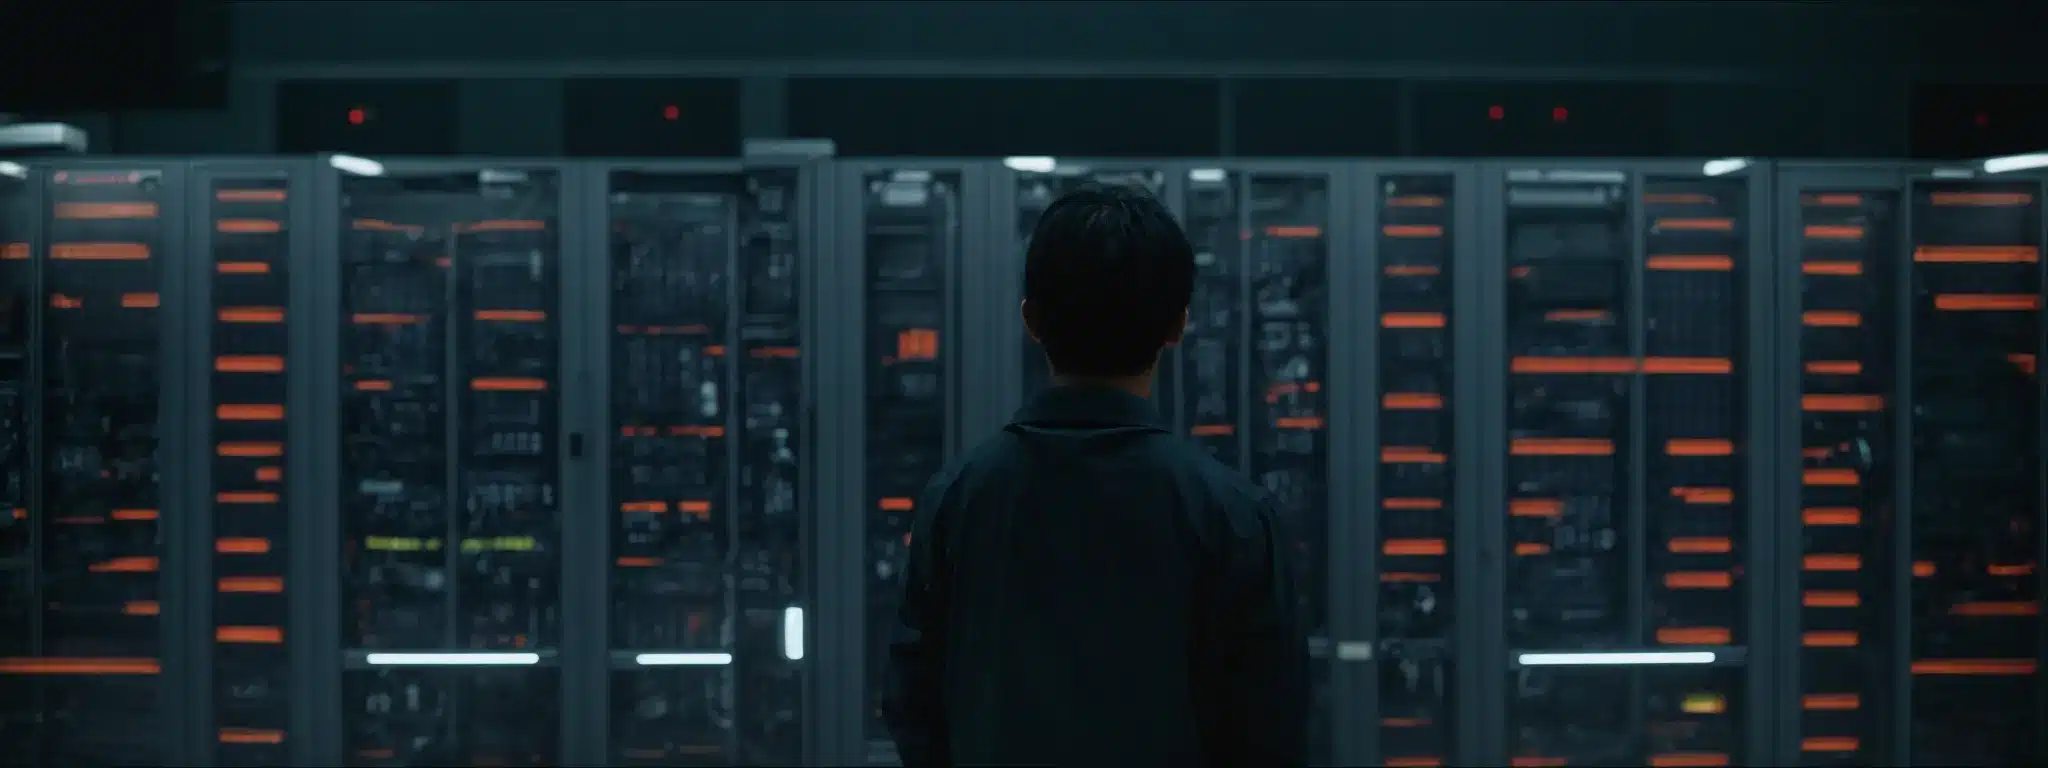 A Person Stands At An Interface Of A Large, Computer Server Room, Ready To Navigate Through A Maze Of Equipment.